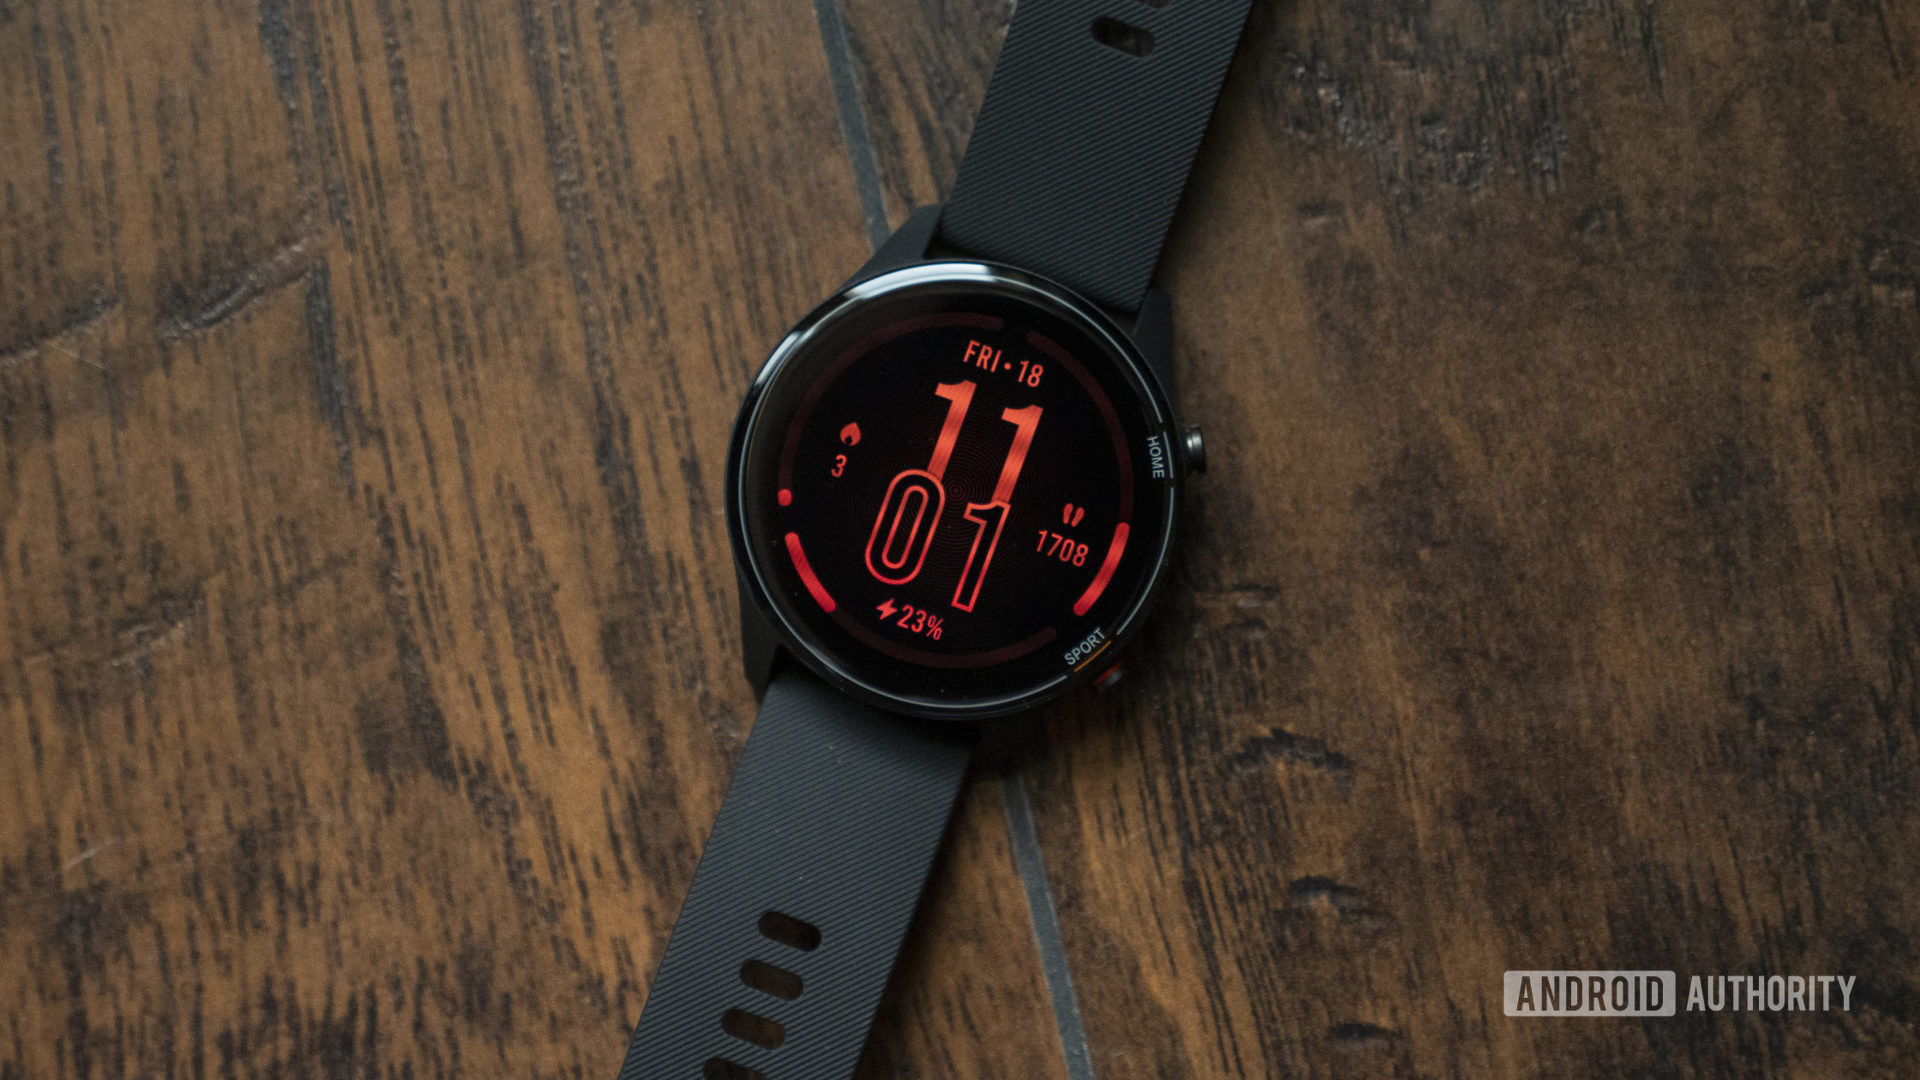 I've been using Nothing's new budget smartwatch for a week